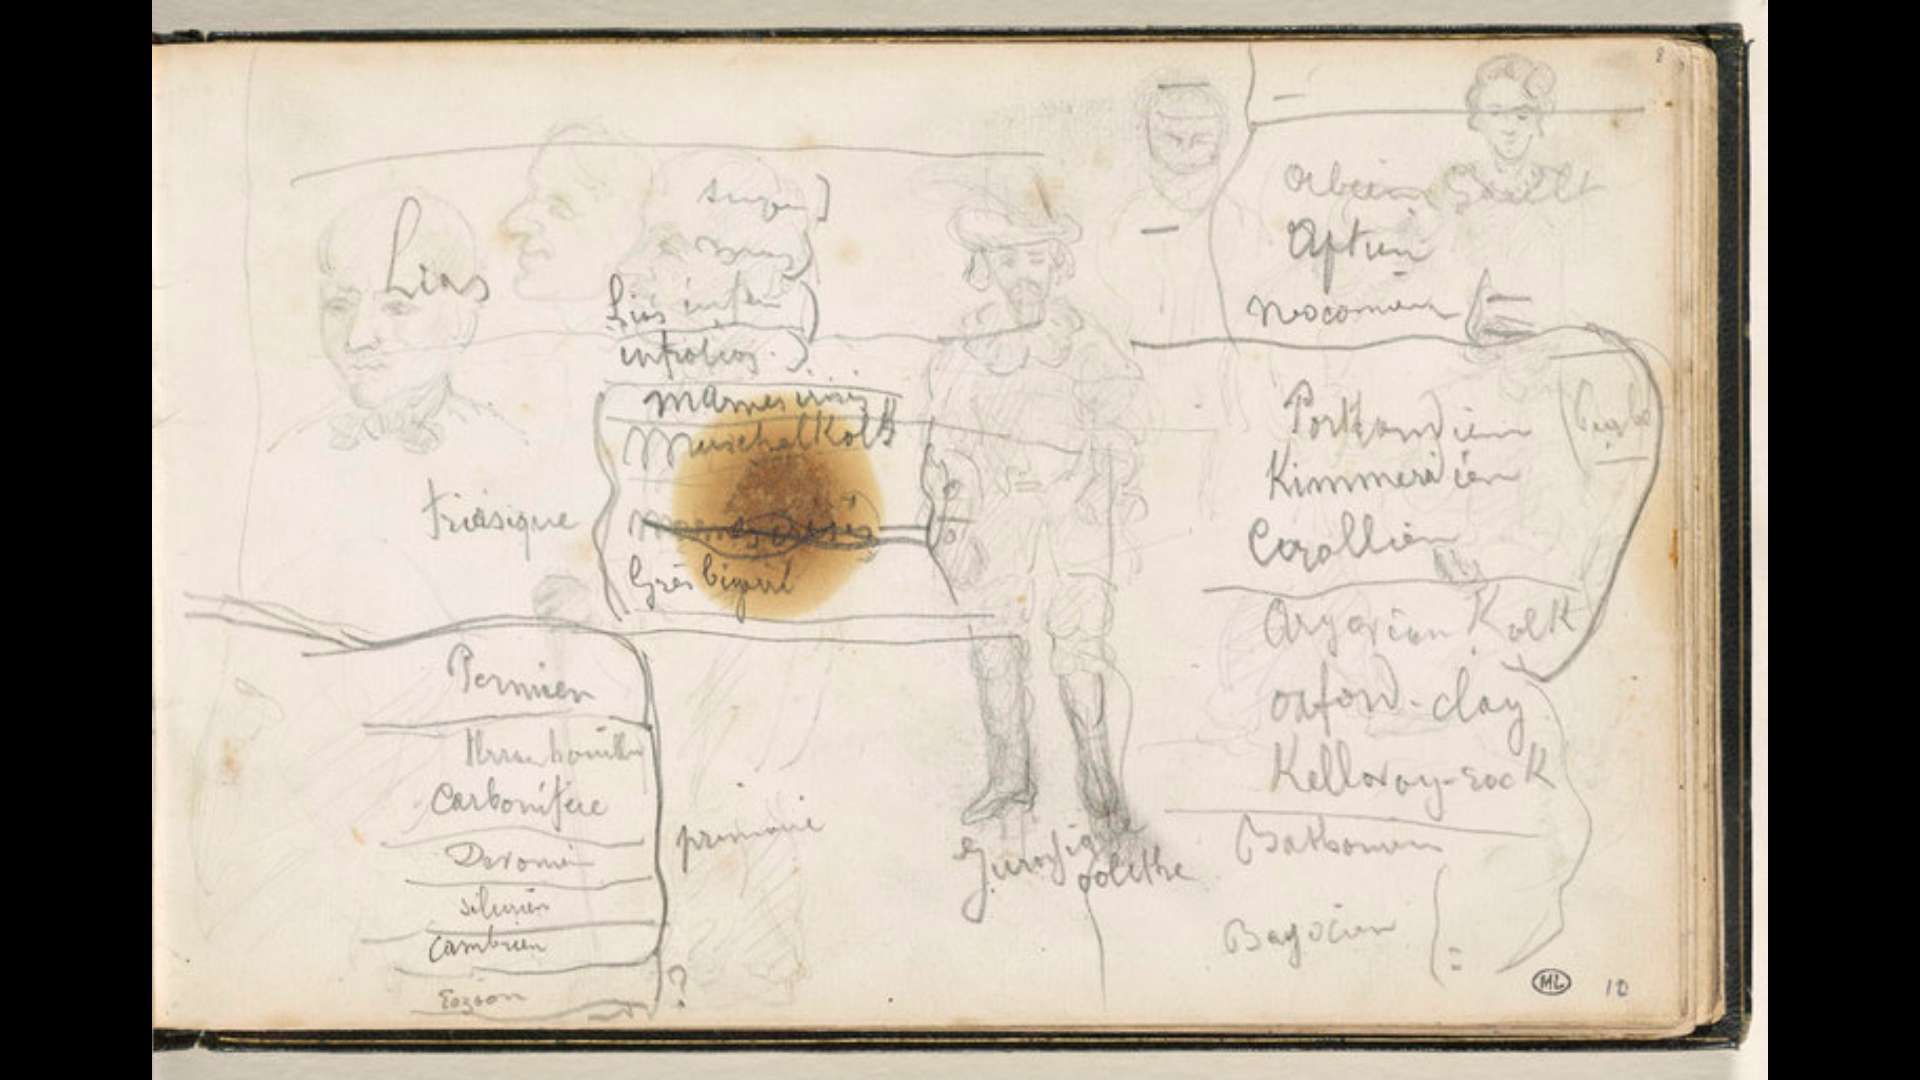 Paul Cézanne (sketches) and Antoine-Fortuné Marion (inscriptions)                                                 double-page spread from a notebook - with characters, caricatured faces, stratifications and geological terms, towards 1866-1867, pencil on paper, Paris, Musée d’Orsay.